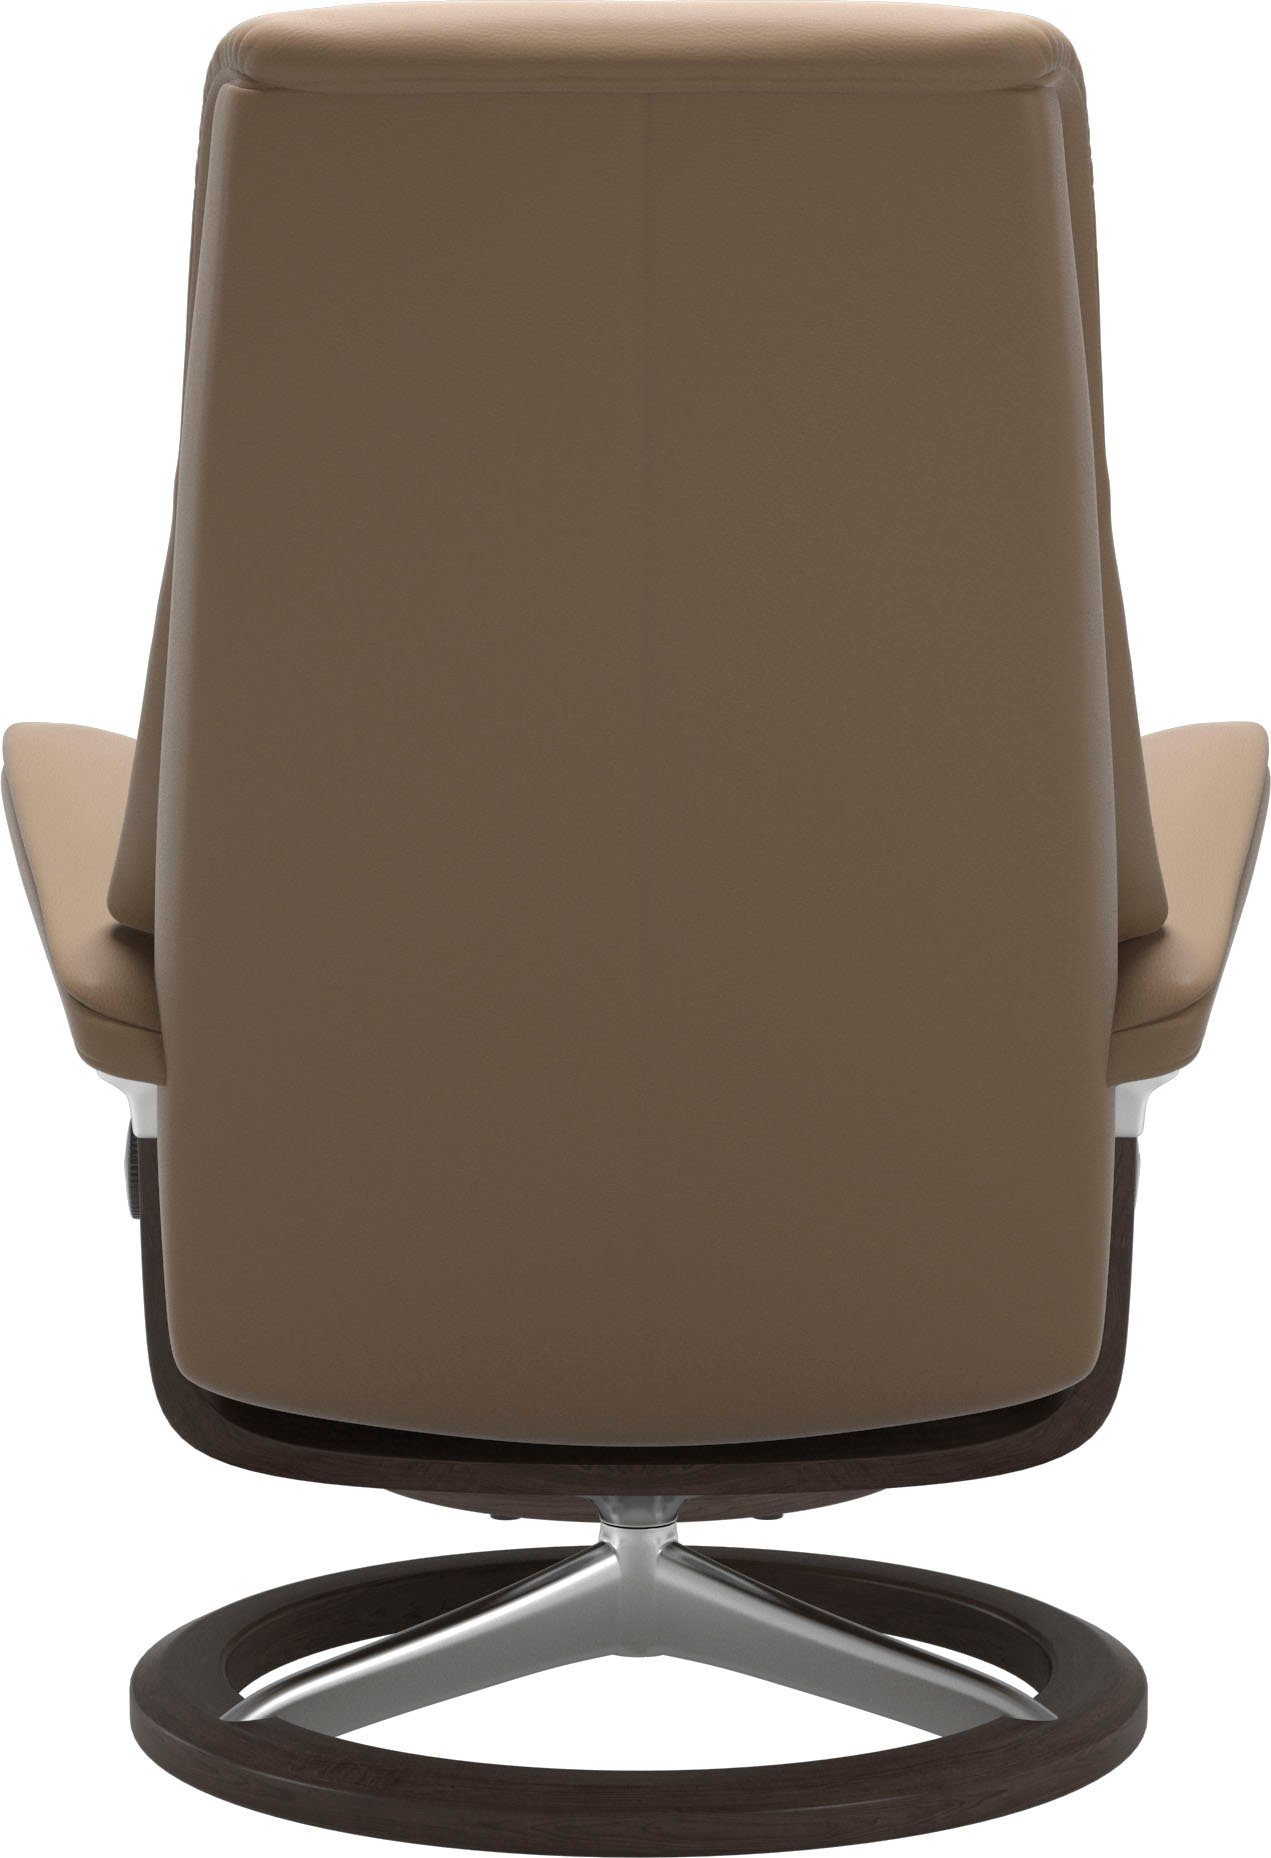 S,Gestell Stressless® Signature Relaxsessel View, mit Wenge Größe Base,